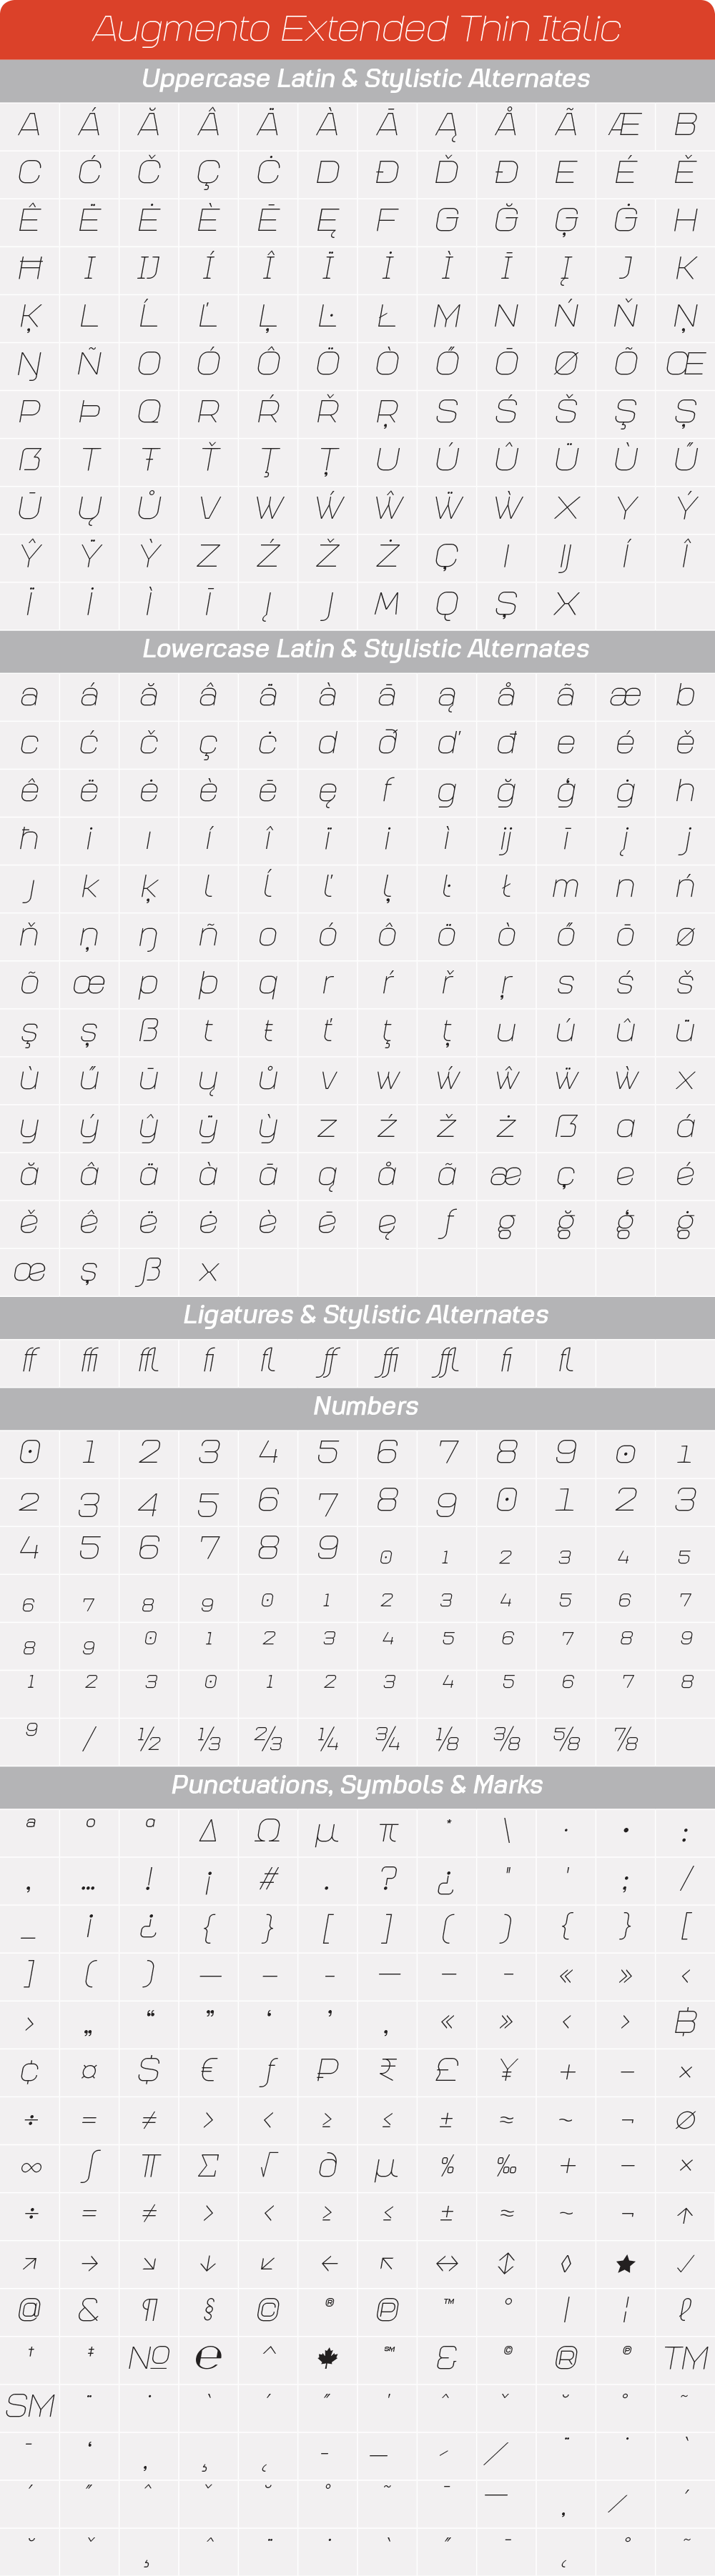 Extended Thin ItalicAugmento-GlyphTable.png